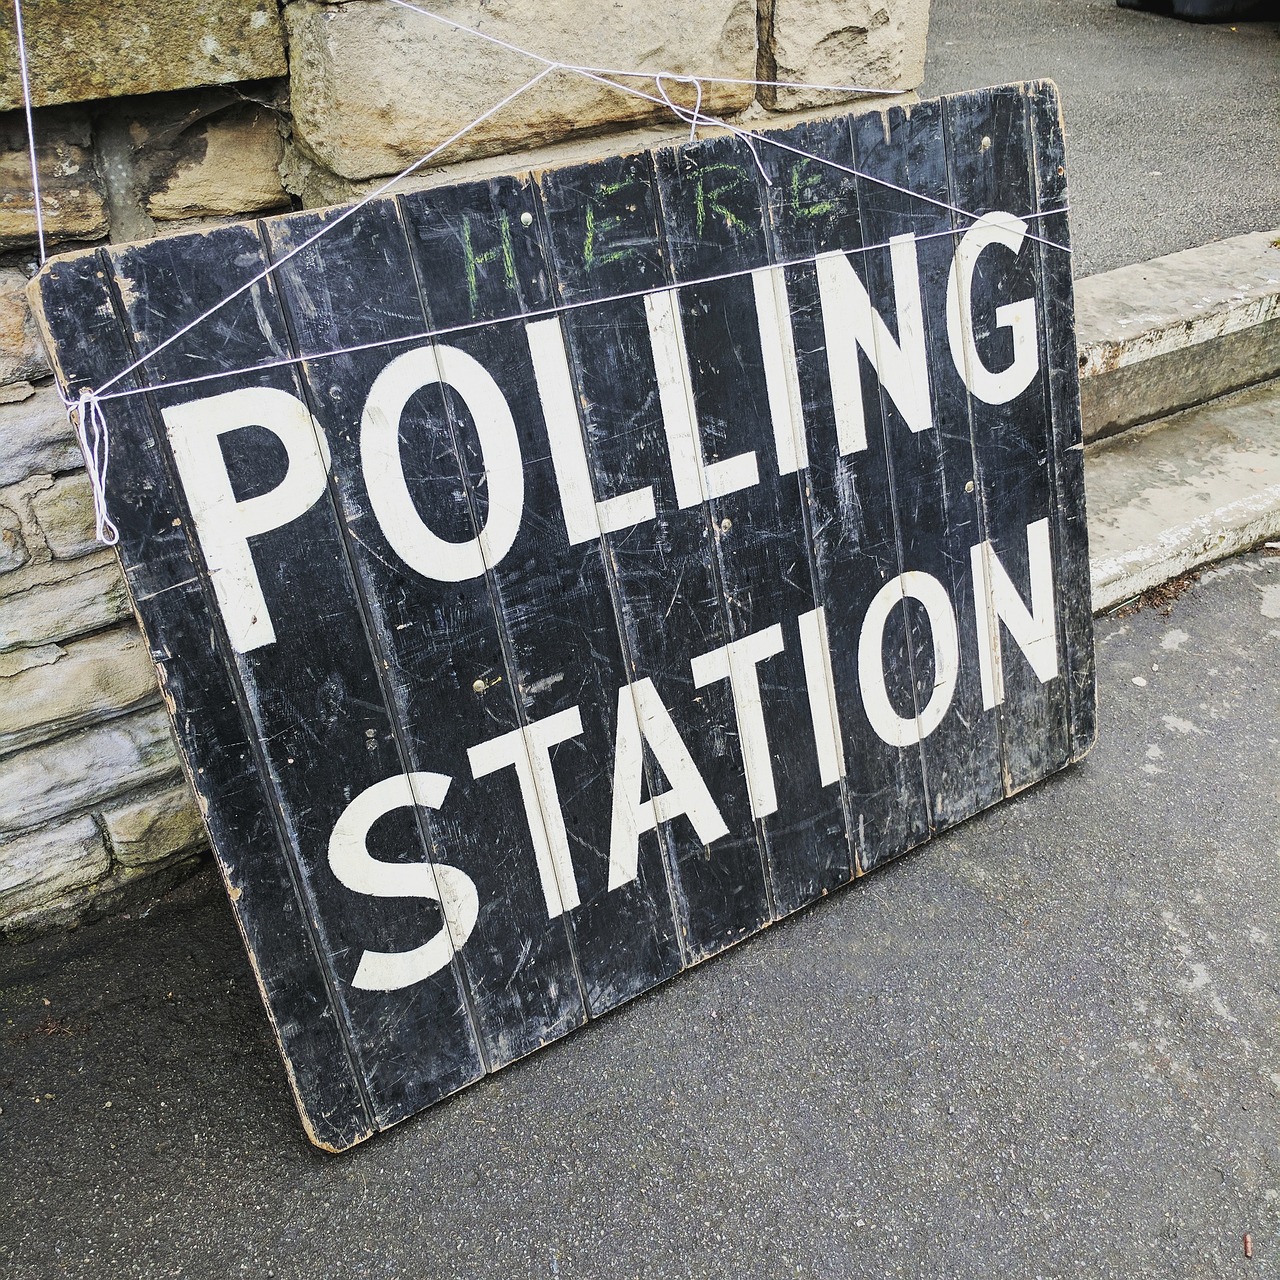 polling-station